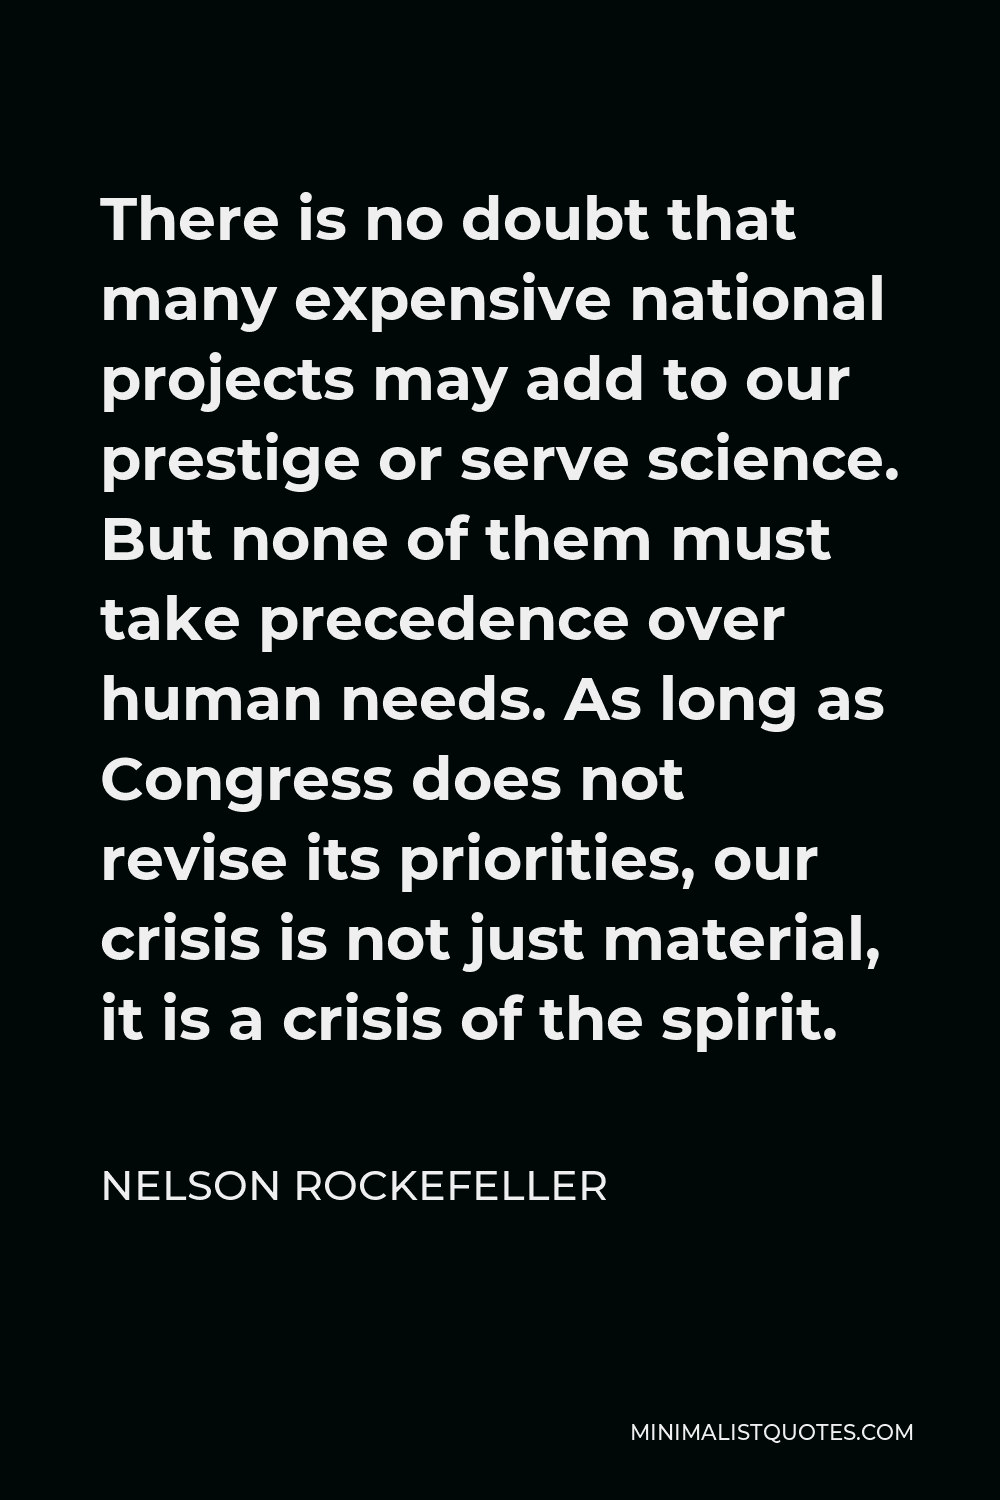 Nelson Rockefeller Quote - There is no doubt that many expensive national projects may add to our prestige or serve science. But none of them must take precedence over human needs. As long as Congress does not revise its priorities, our crisis is not just material, it is a crisis of the spirit.